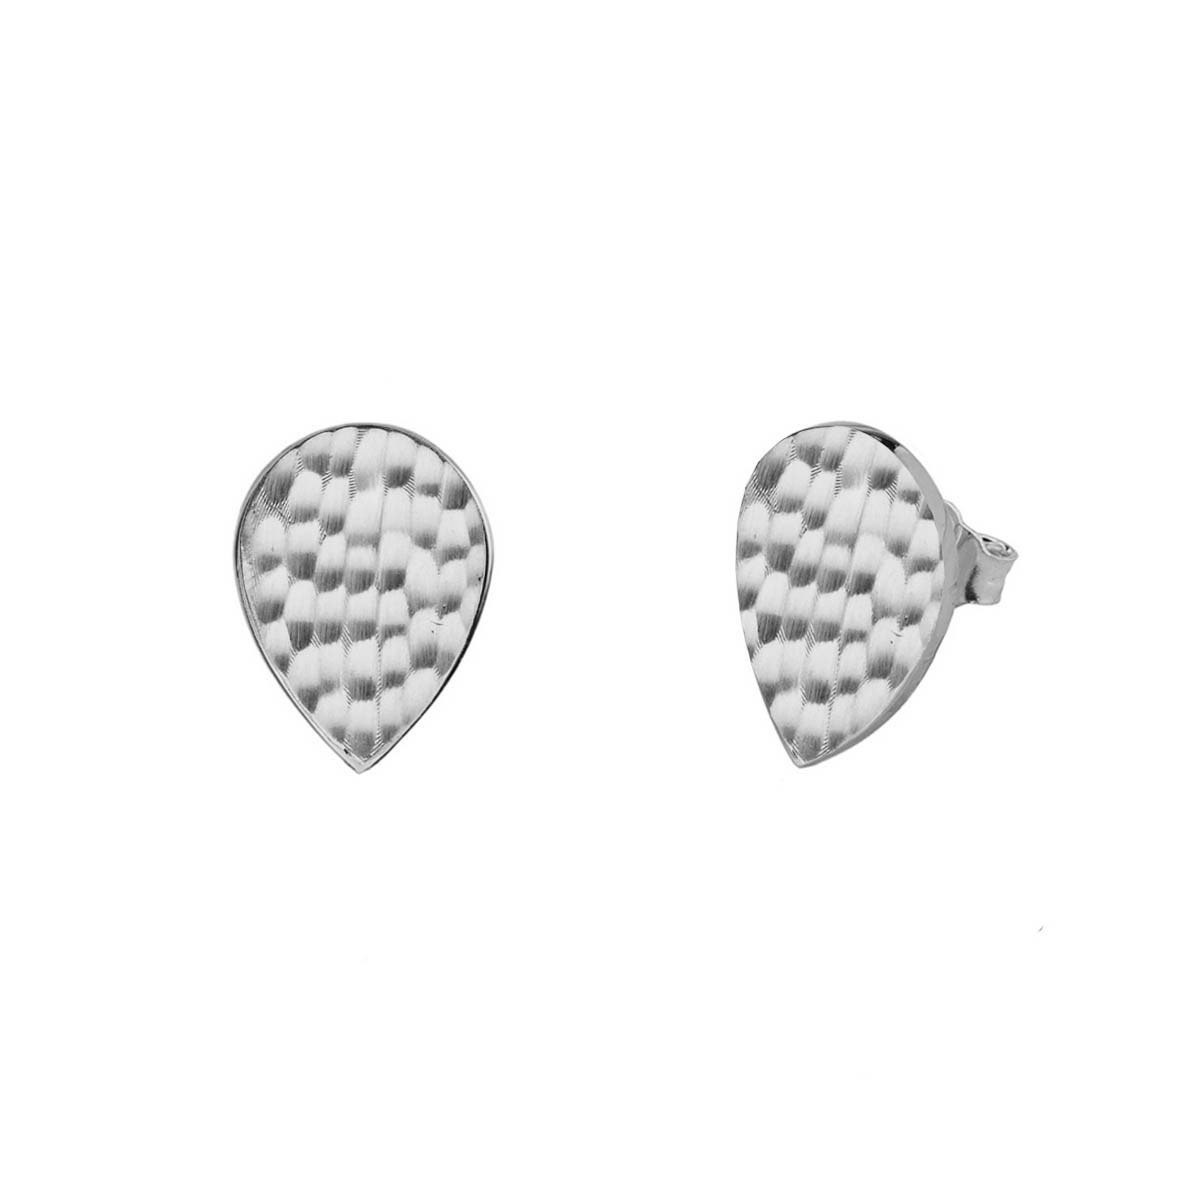 Gold Boutique - White Earrings - Gents GOOFASH